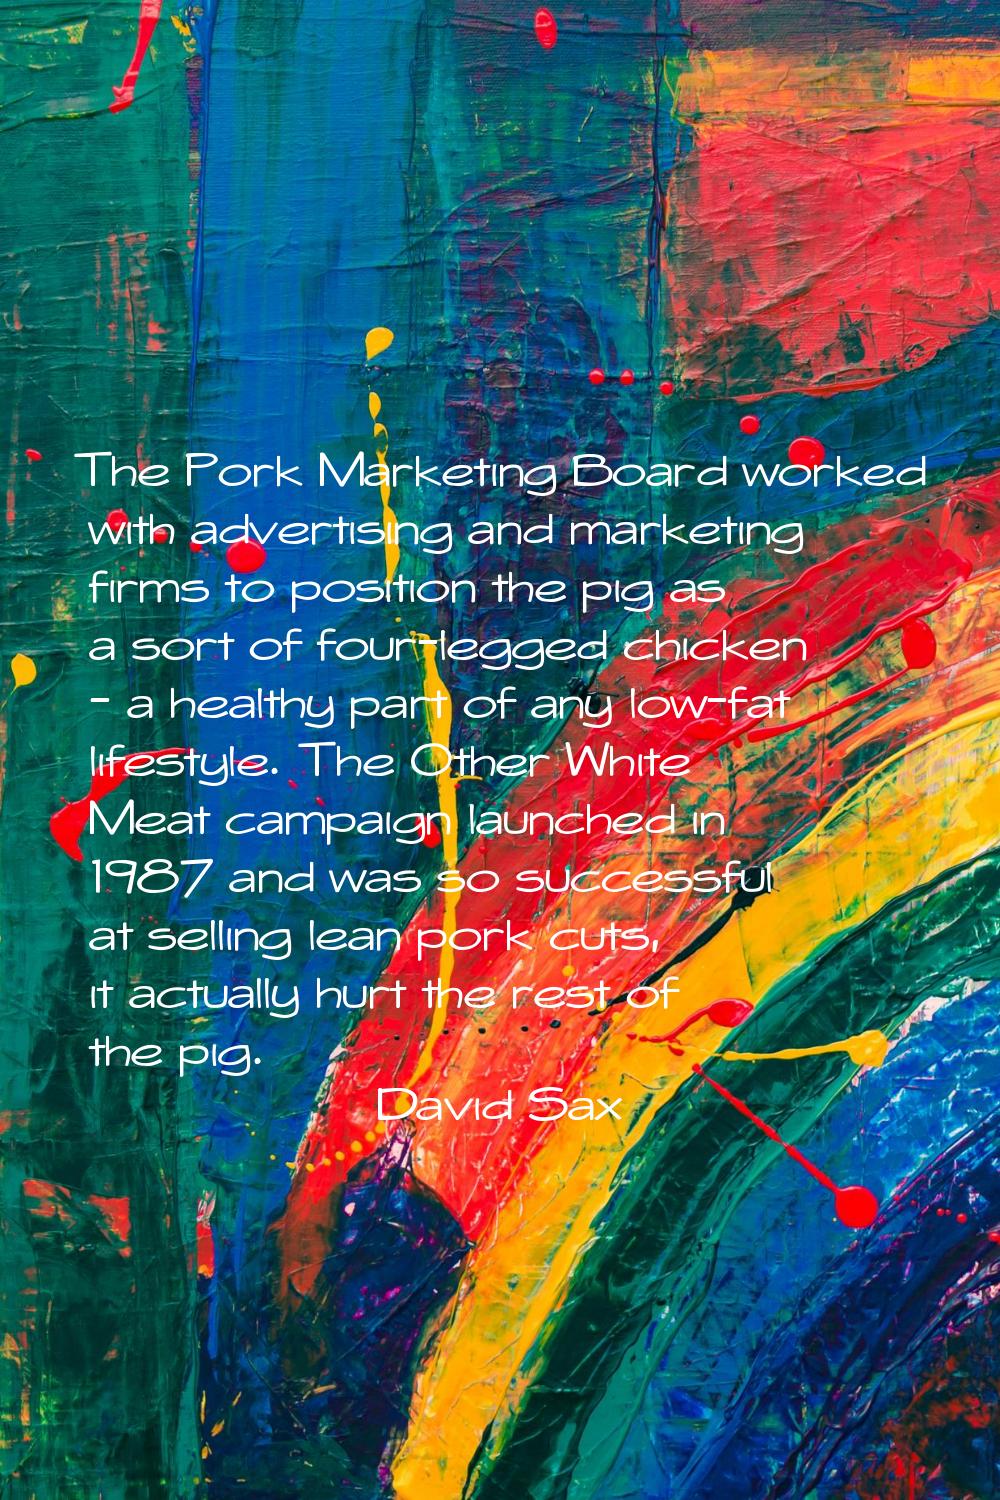 The Pork Marketing Board worked with advertising and marketing firms to position the pig as a sort 